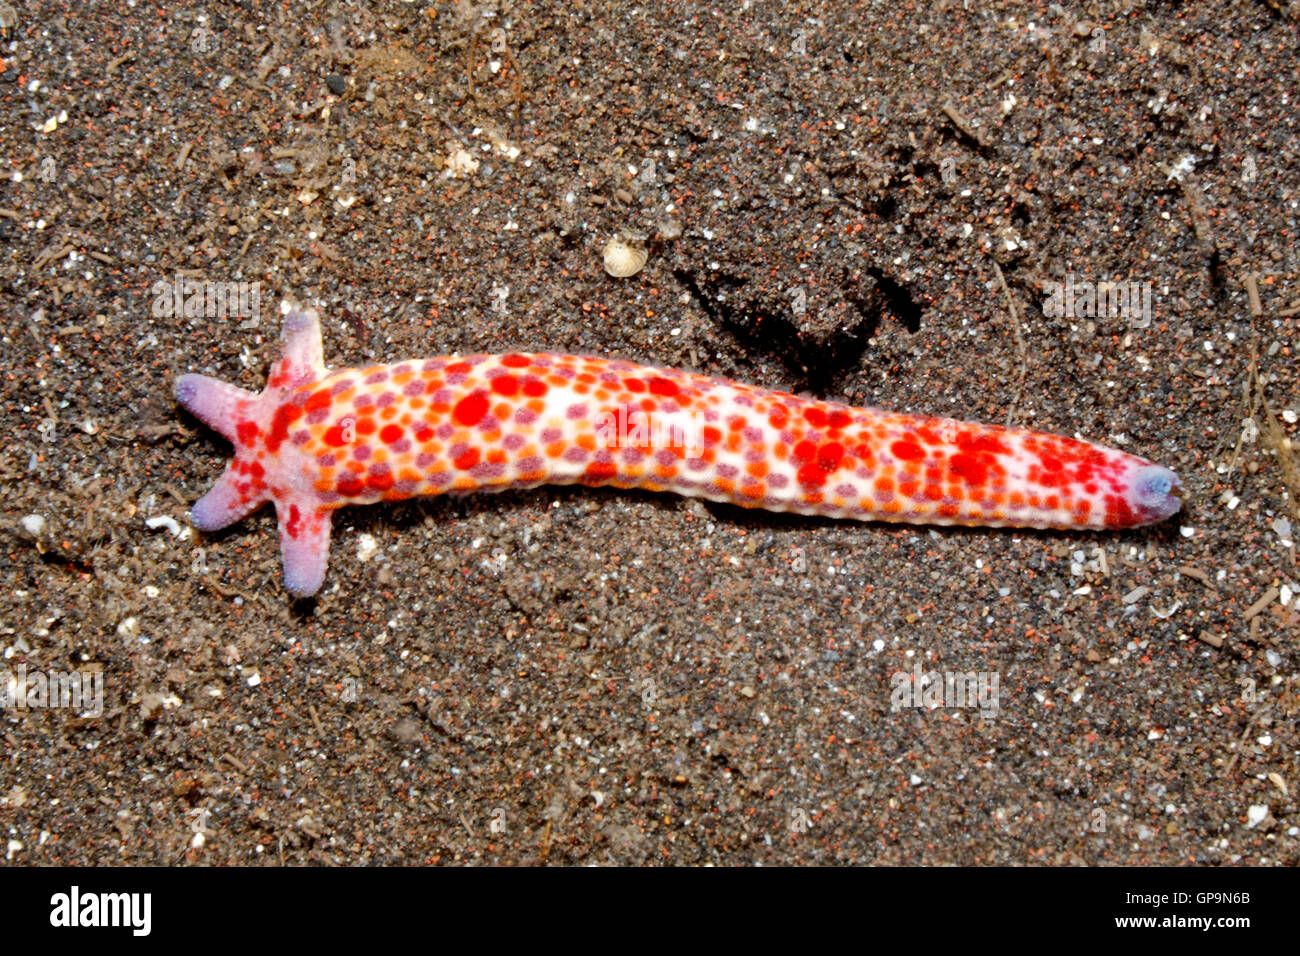 Comet Sea Star, Linckia multifora, showing a five arm regeneration growing from the stump of a 'parent' arm. Please see below for more information. Stock Photo